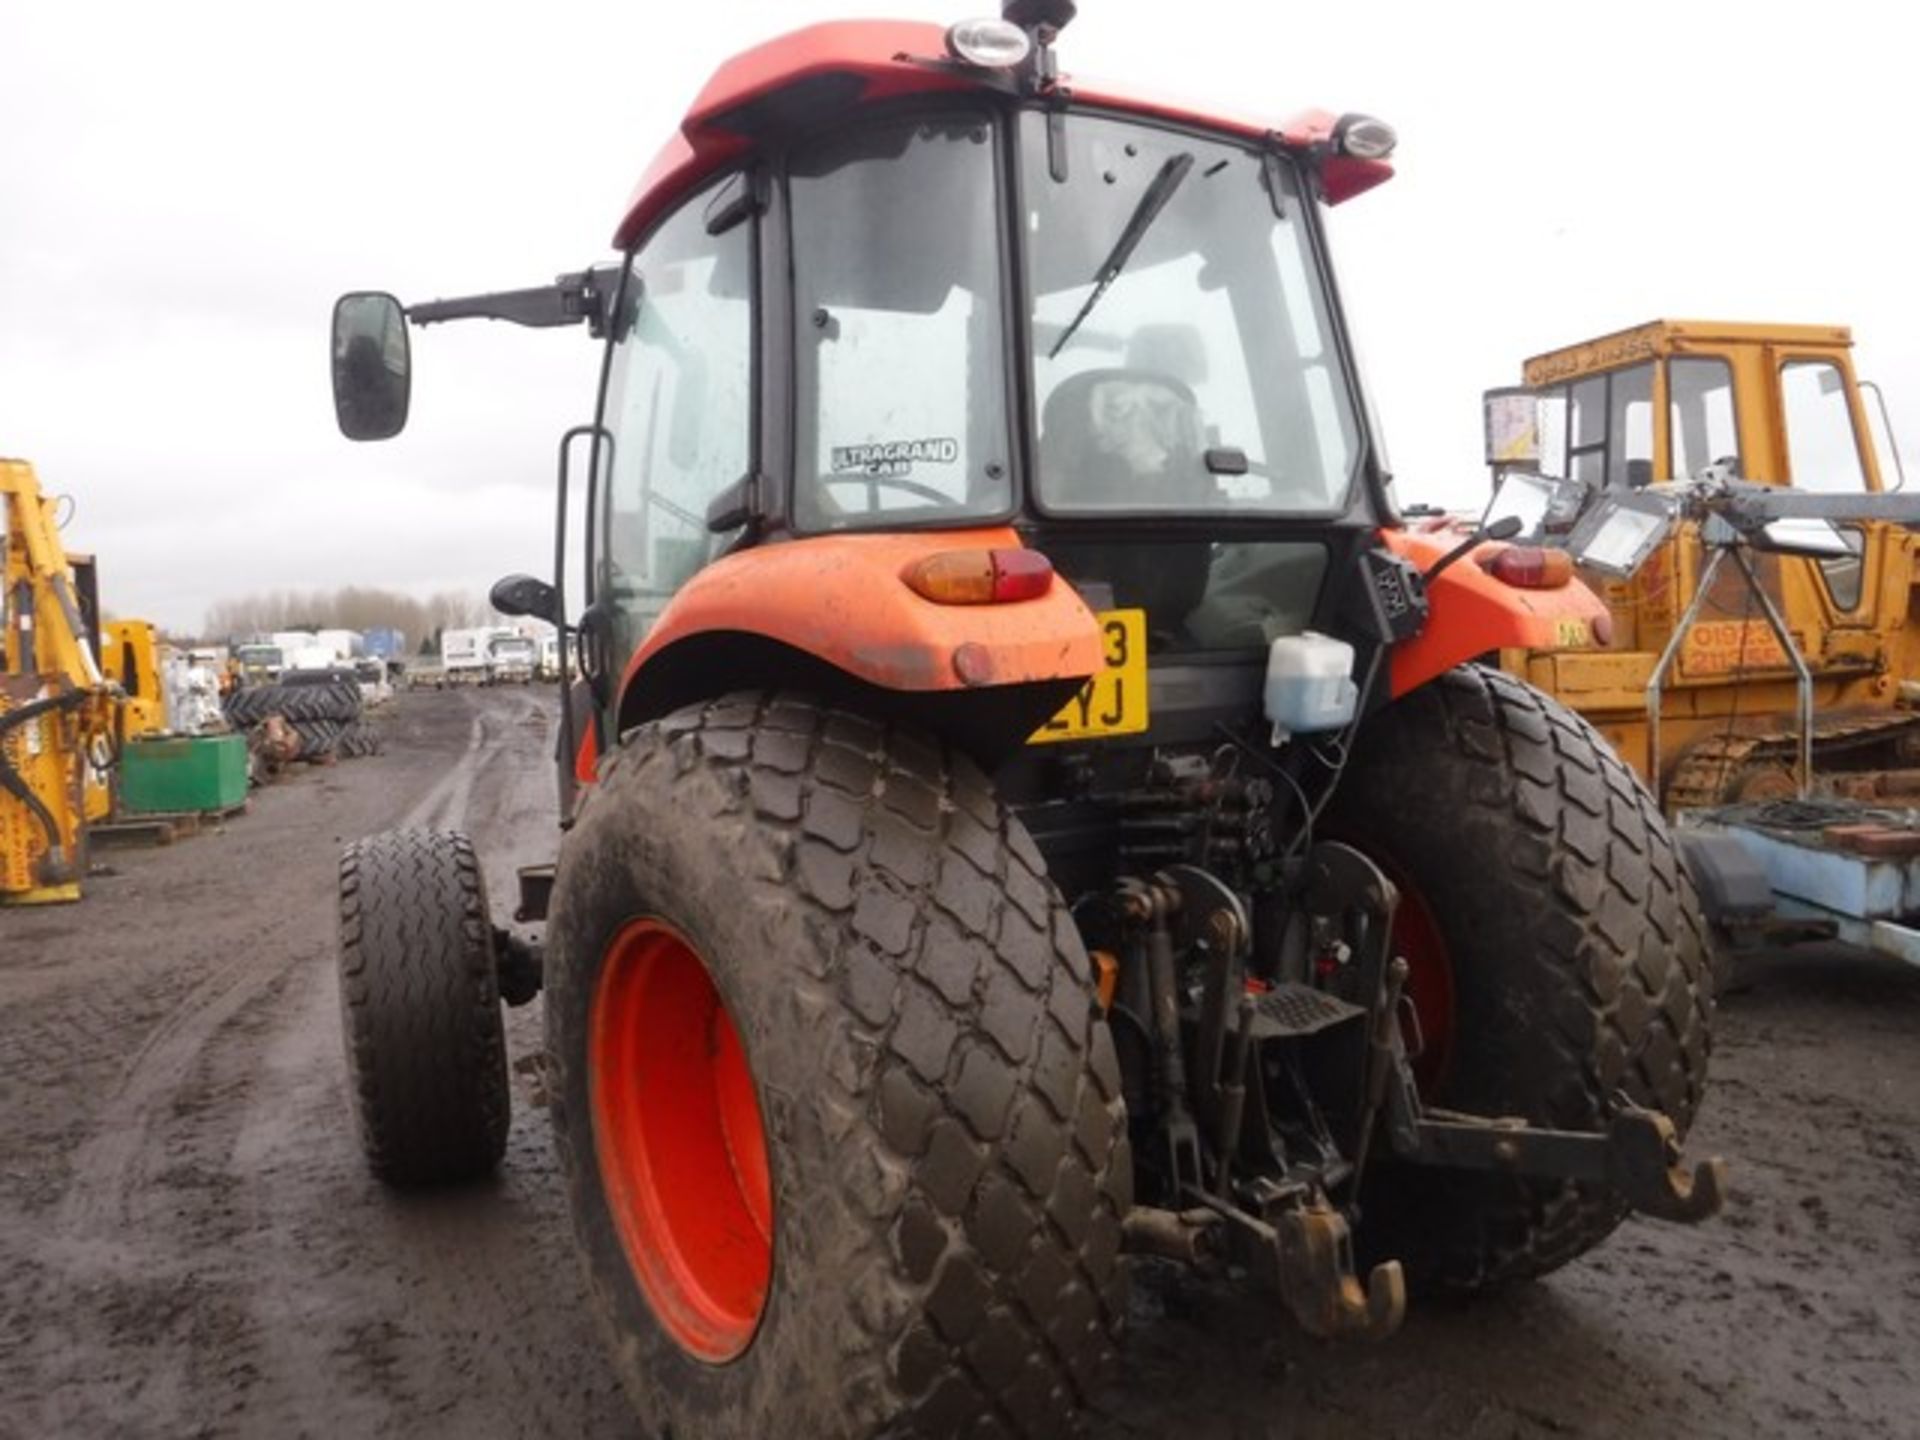 2013 KUBOTA M6040H-C AAGRIC TRACTOR REG - SF13EYJ - 6828HRS - Image 6 of 10